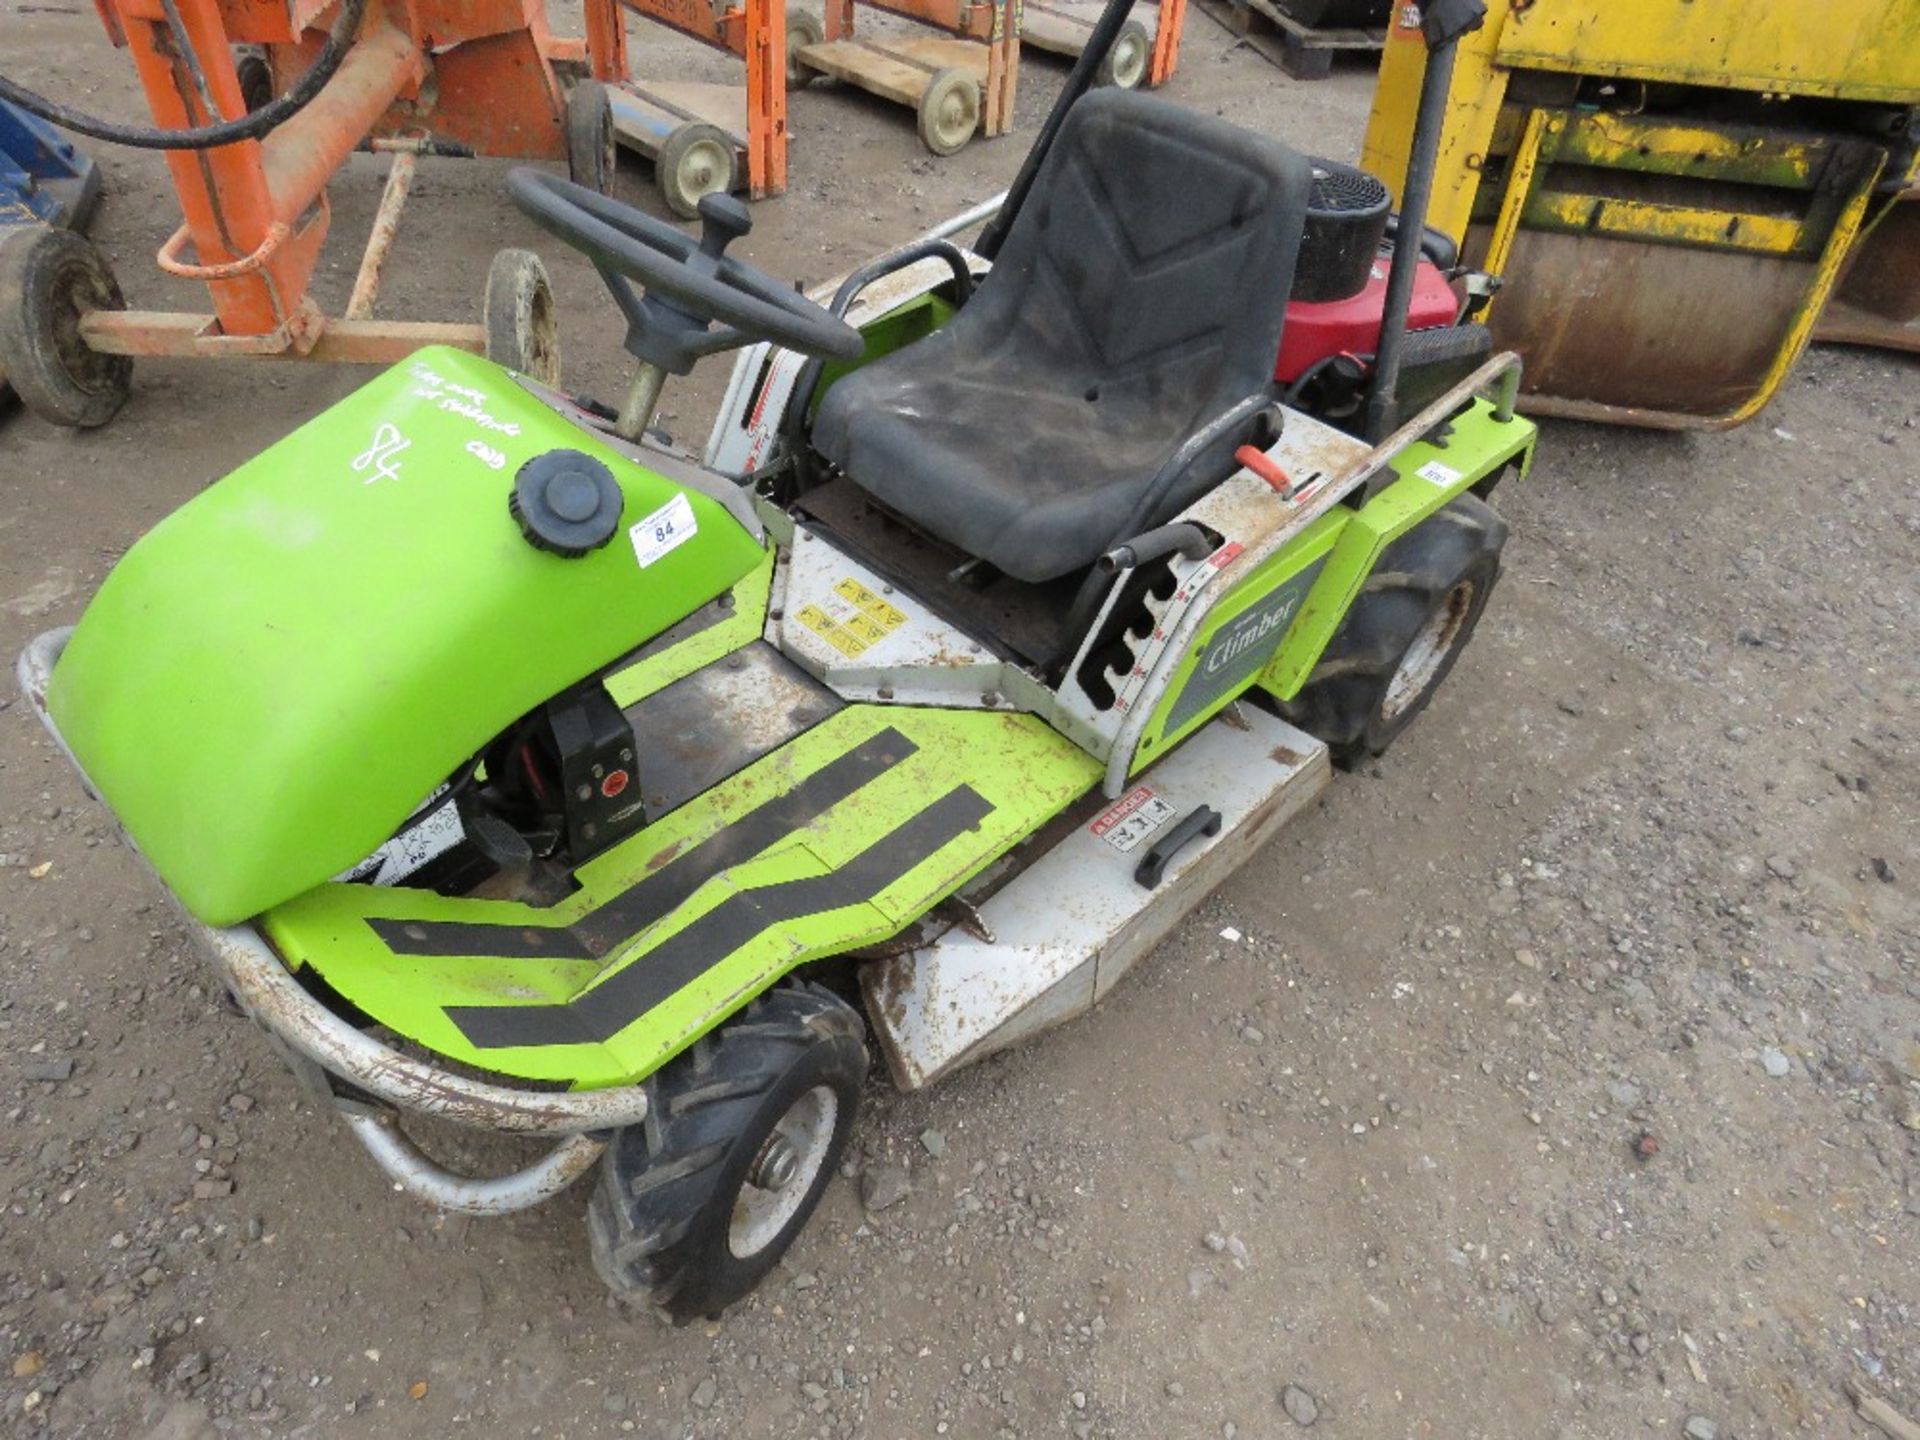 GRILLO CLIMBER BANK MOWER. WHEN TESTED WAS SEEN TO TURN OVER, NOT STARTING.